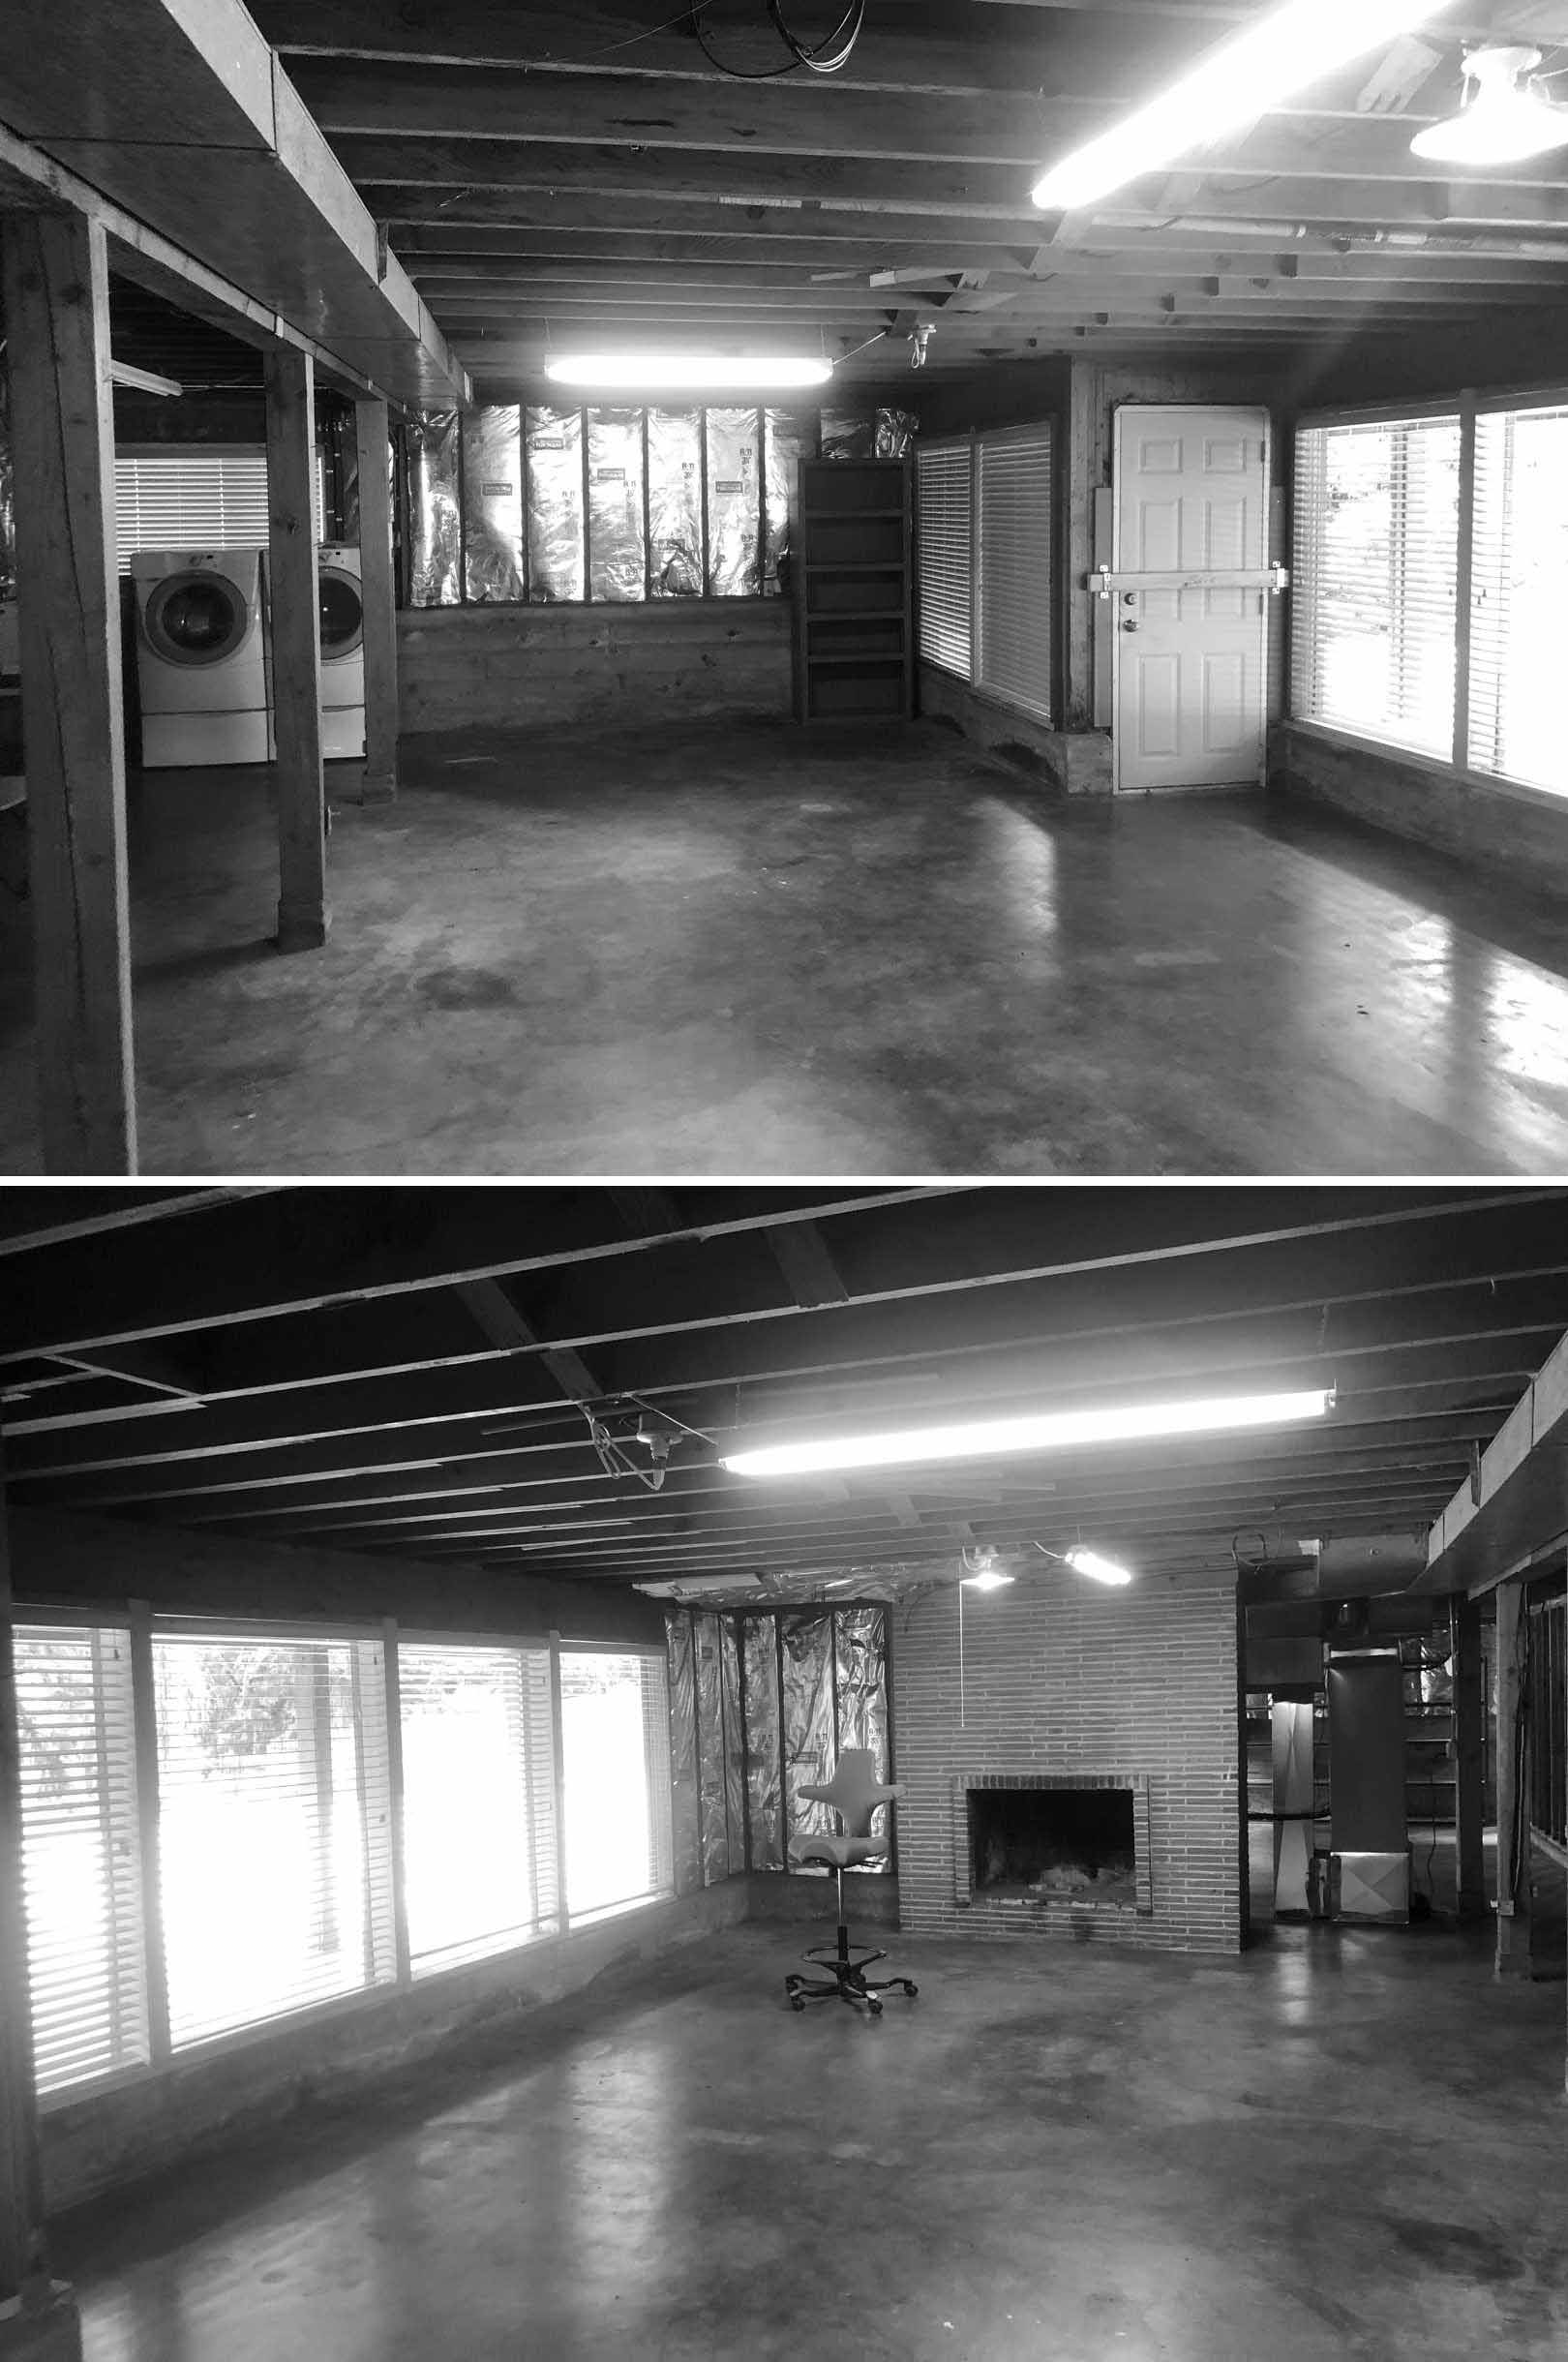 BEFORE - The lower level of the home, or the basement, was underutilized with exposed structures and insulation.